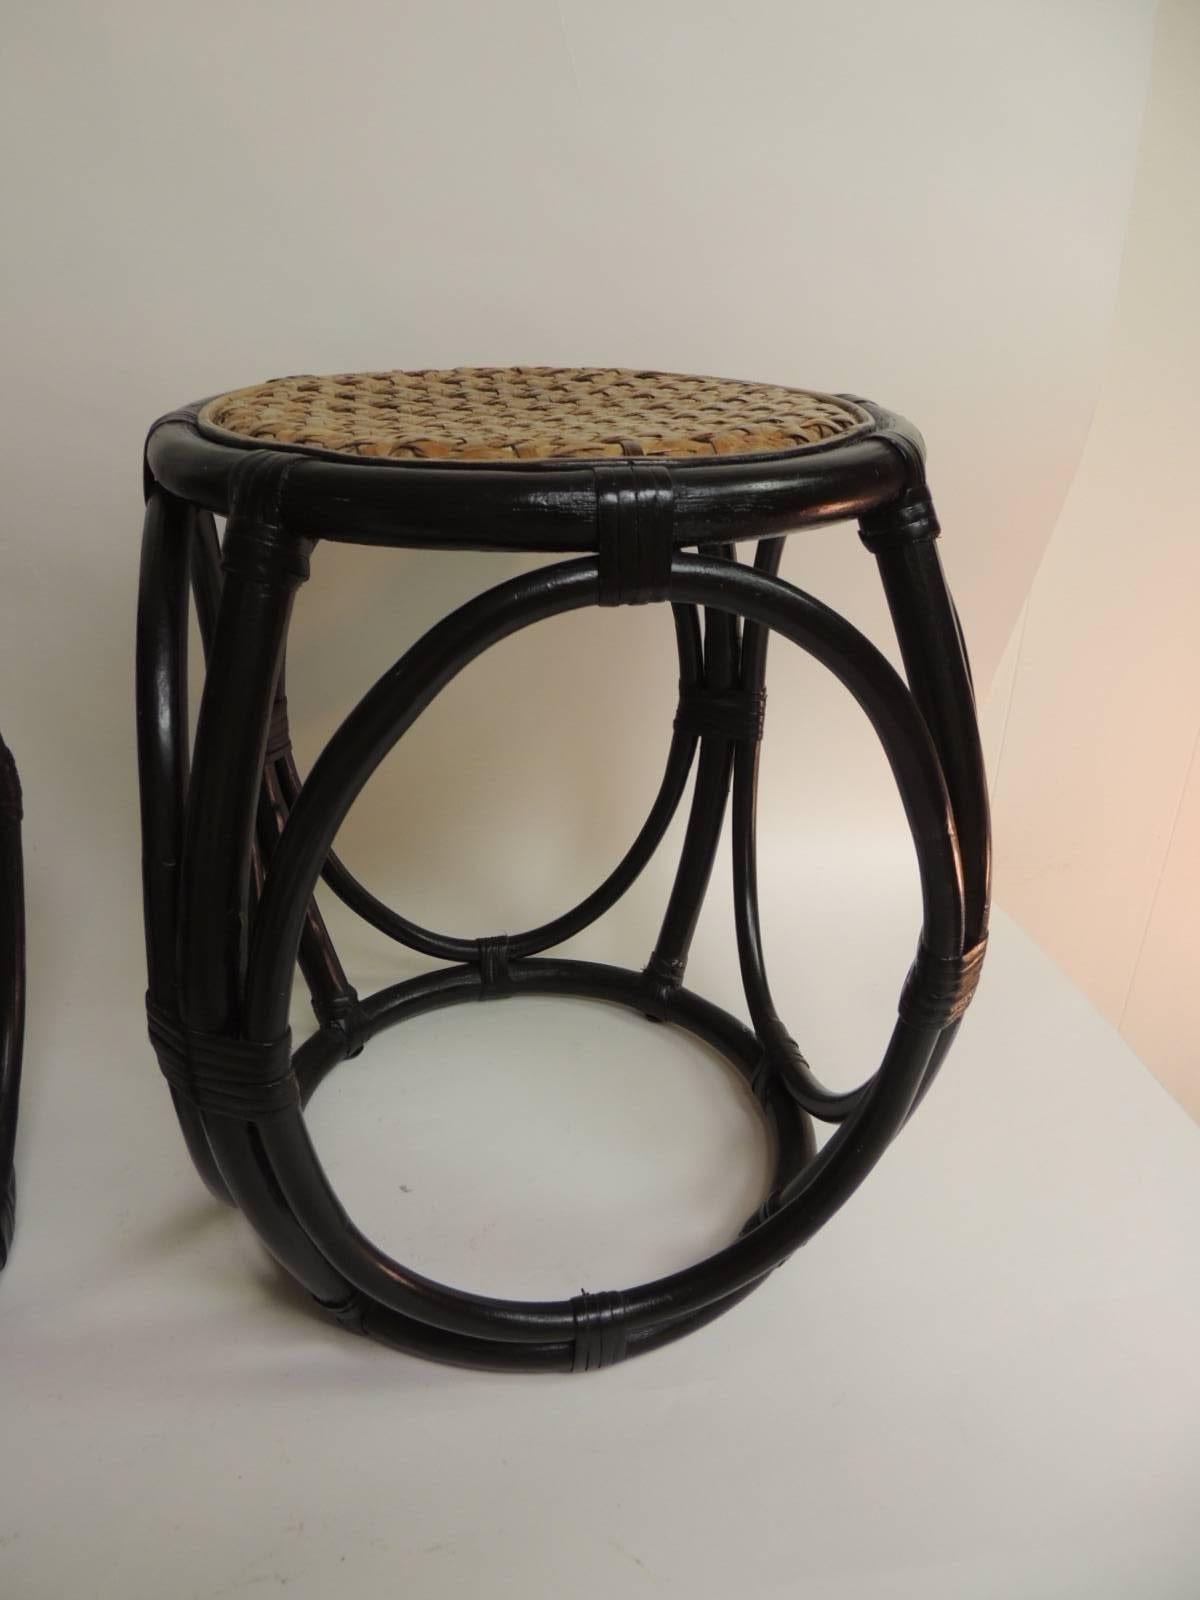 Pair of vintage painted bent bamboo tabourets with wicker woven seats. Round painted black stools with natural color woven wicker seats (in excellent conditions) very sturdy.
Size: 13 x 13 x 17 H.